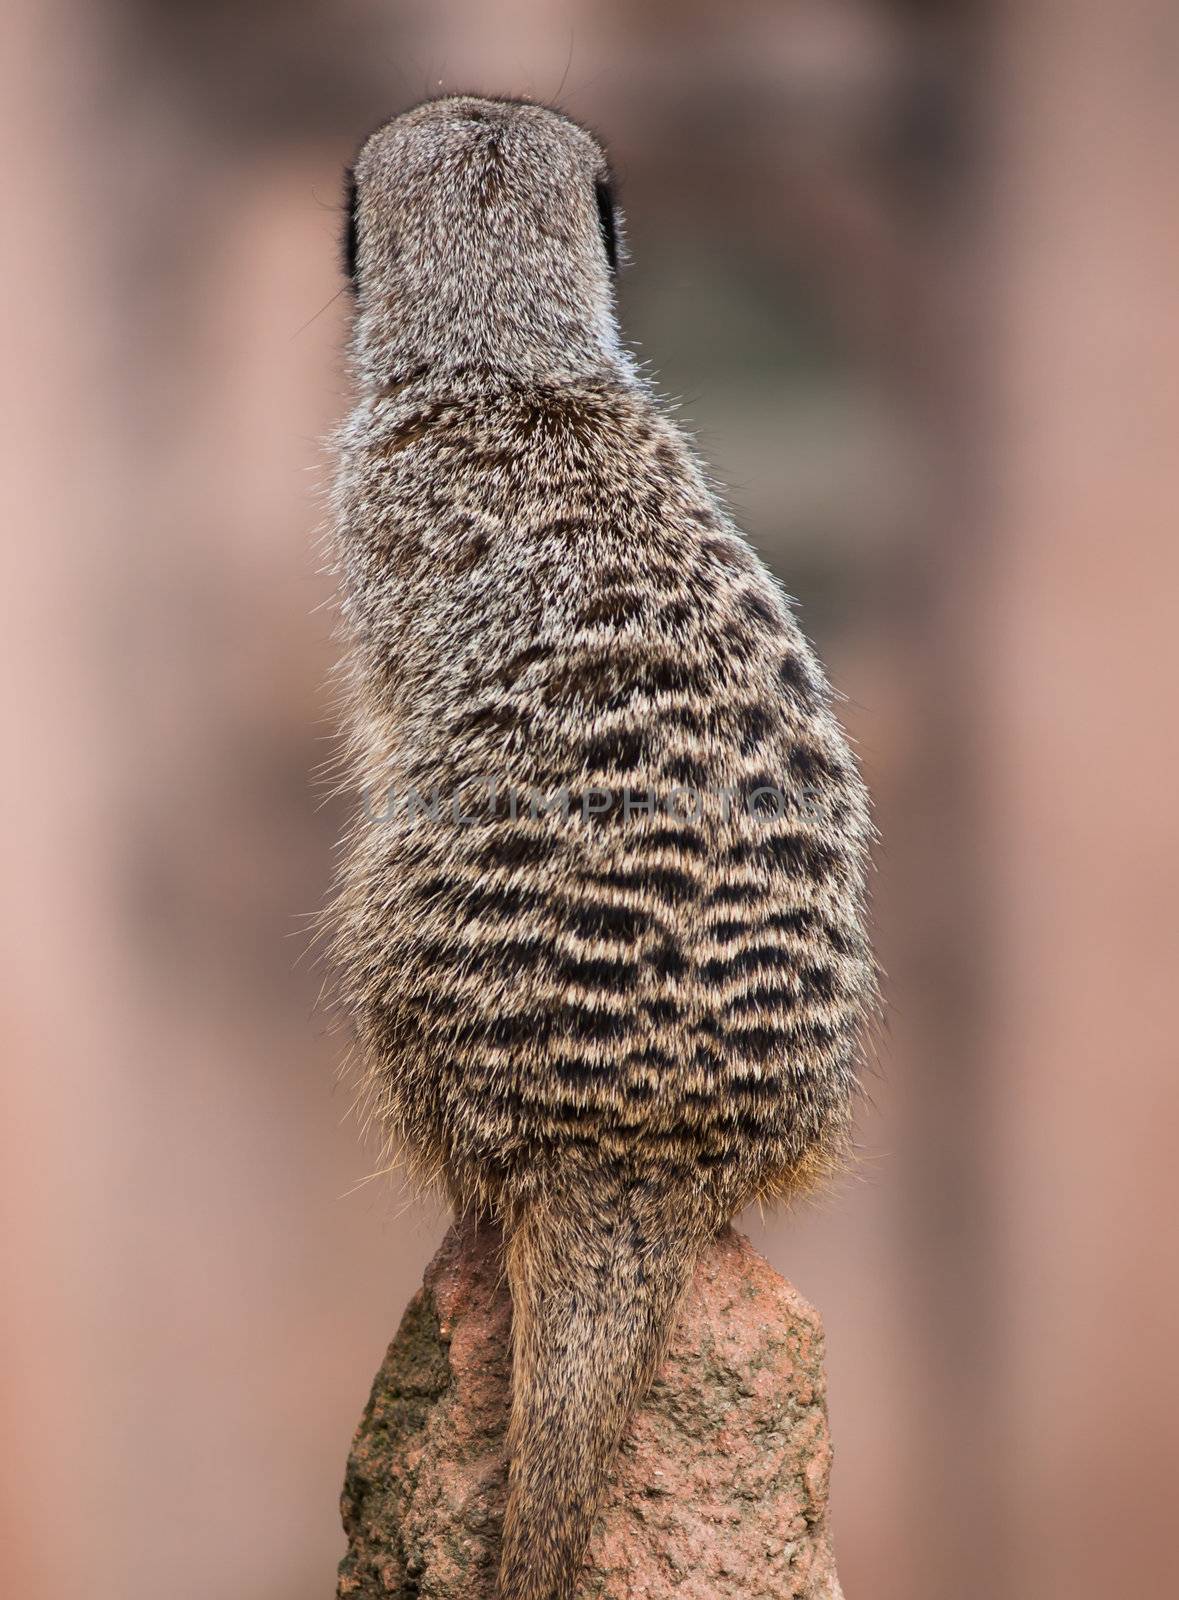 Back of the watchful meerkat on mound by Arsgera